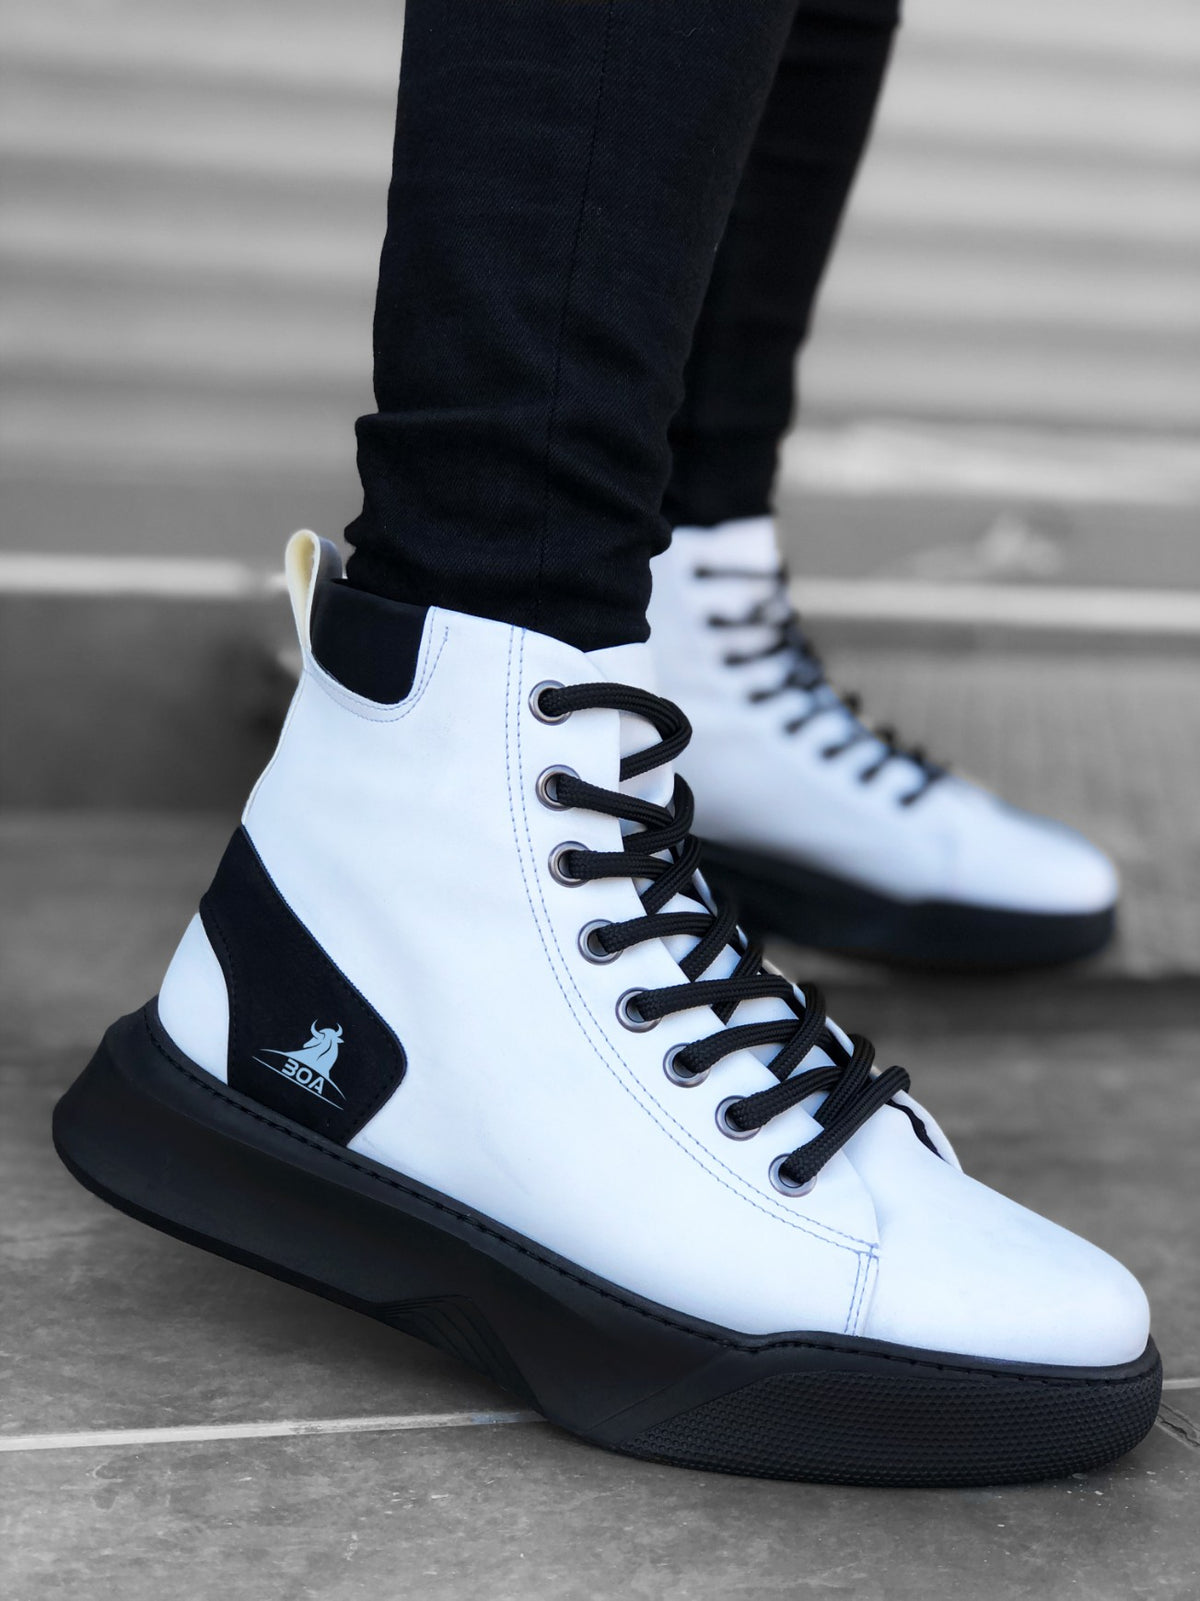 BA0155 Lace-Up Men's High Sole White Black Sole Sport Boots - STREETMODE™